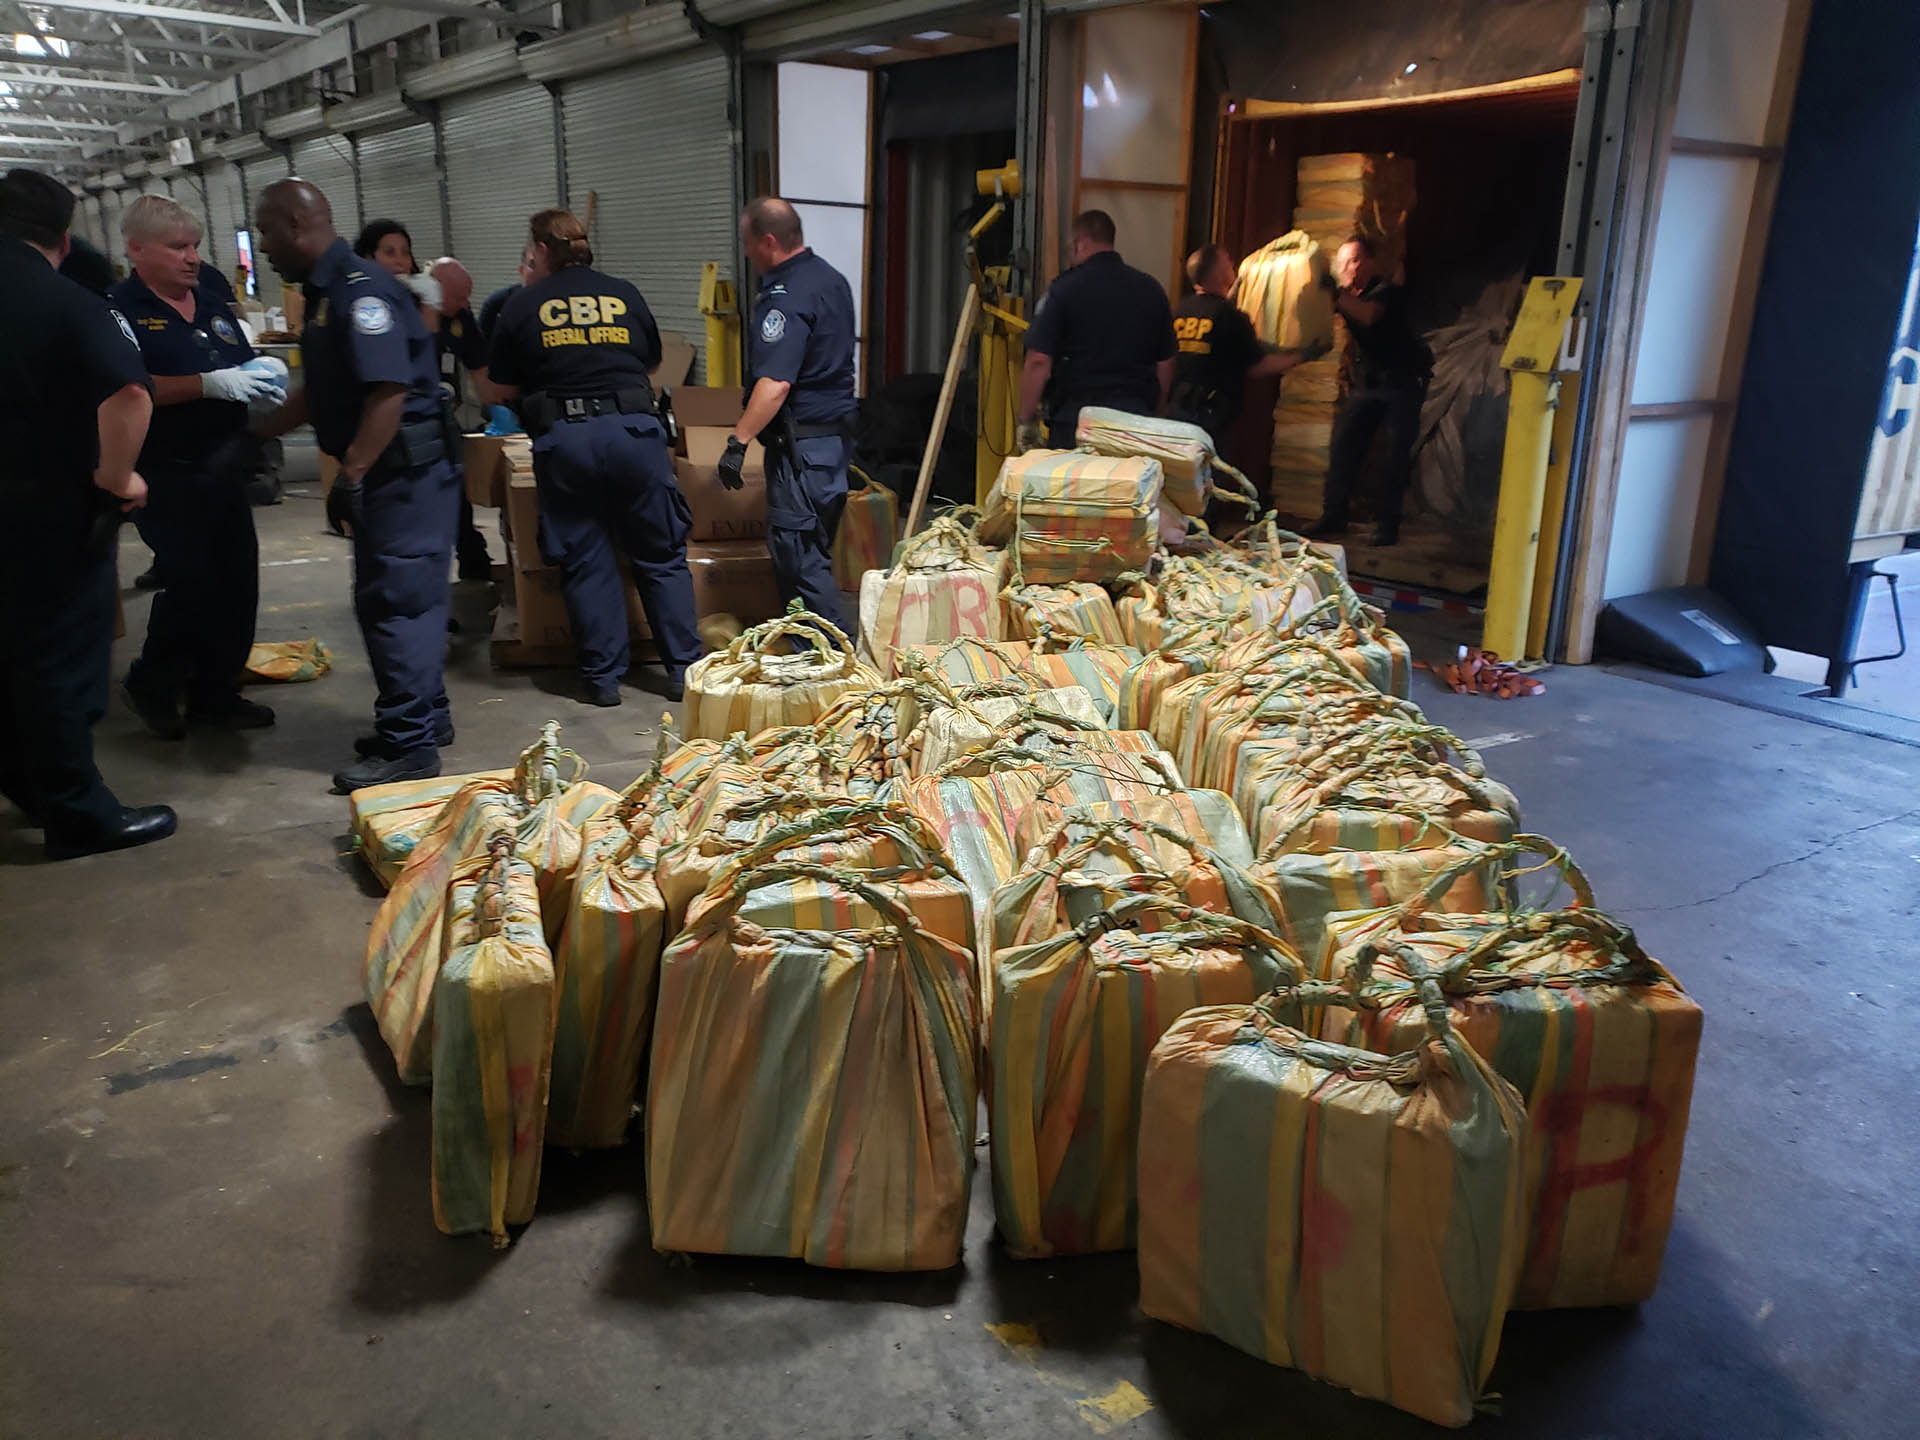 U.S. Customs and Border Protection and Homeland Security Investigations led a multi-agency inspection of the MSC Gayane that resulted in the seizure of about 35,000 pounds of cocaine discovered in seven shipping containers June 17, 2019. The cocaine seizure is a CBP record.